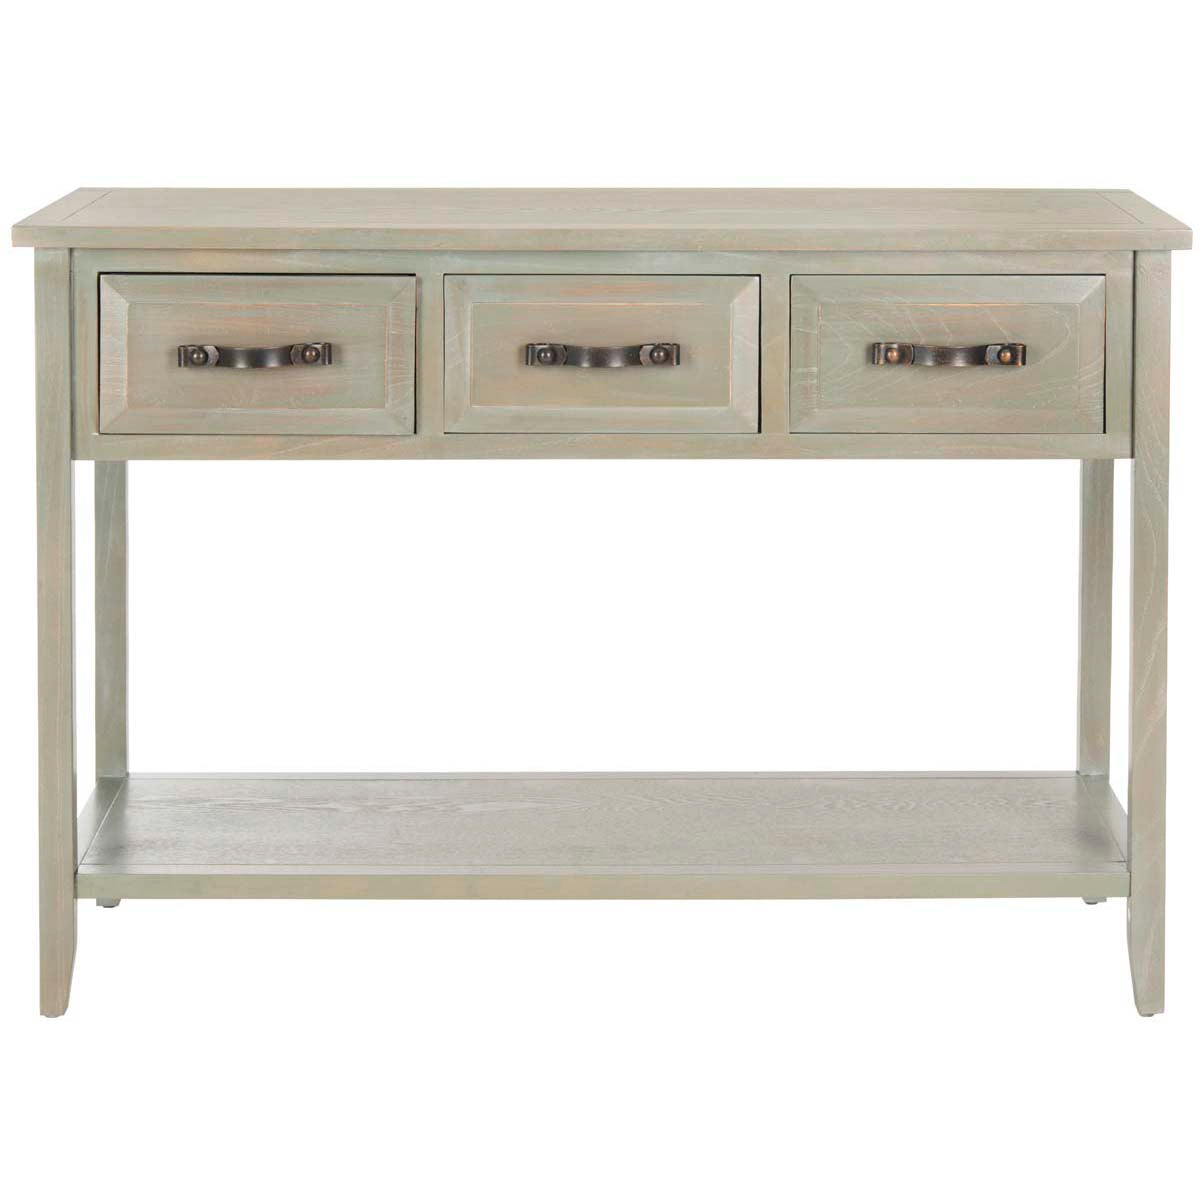 Safavieh Aiden 3 Drawer Console Table , AMH6502 - French Grey